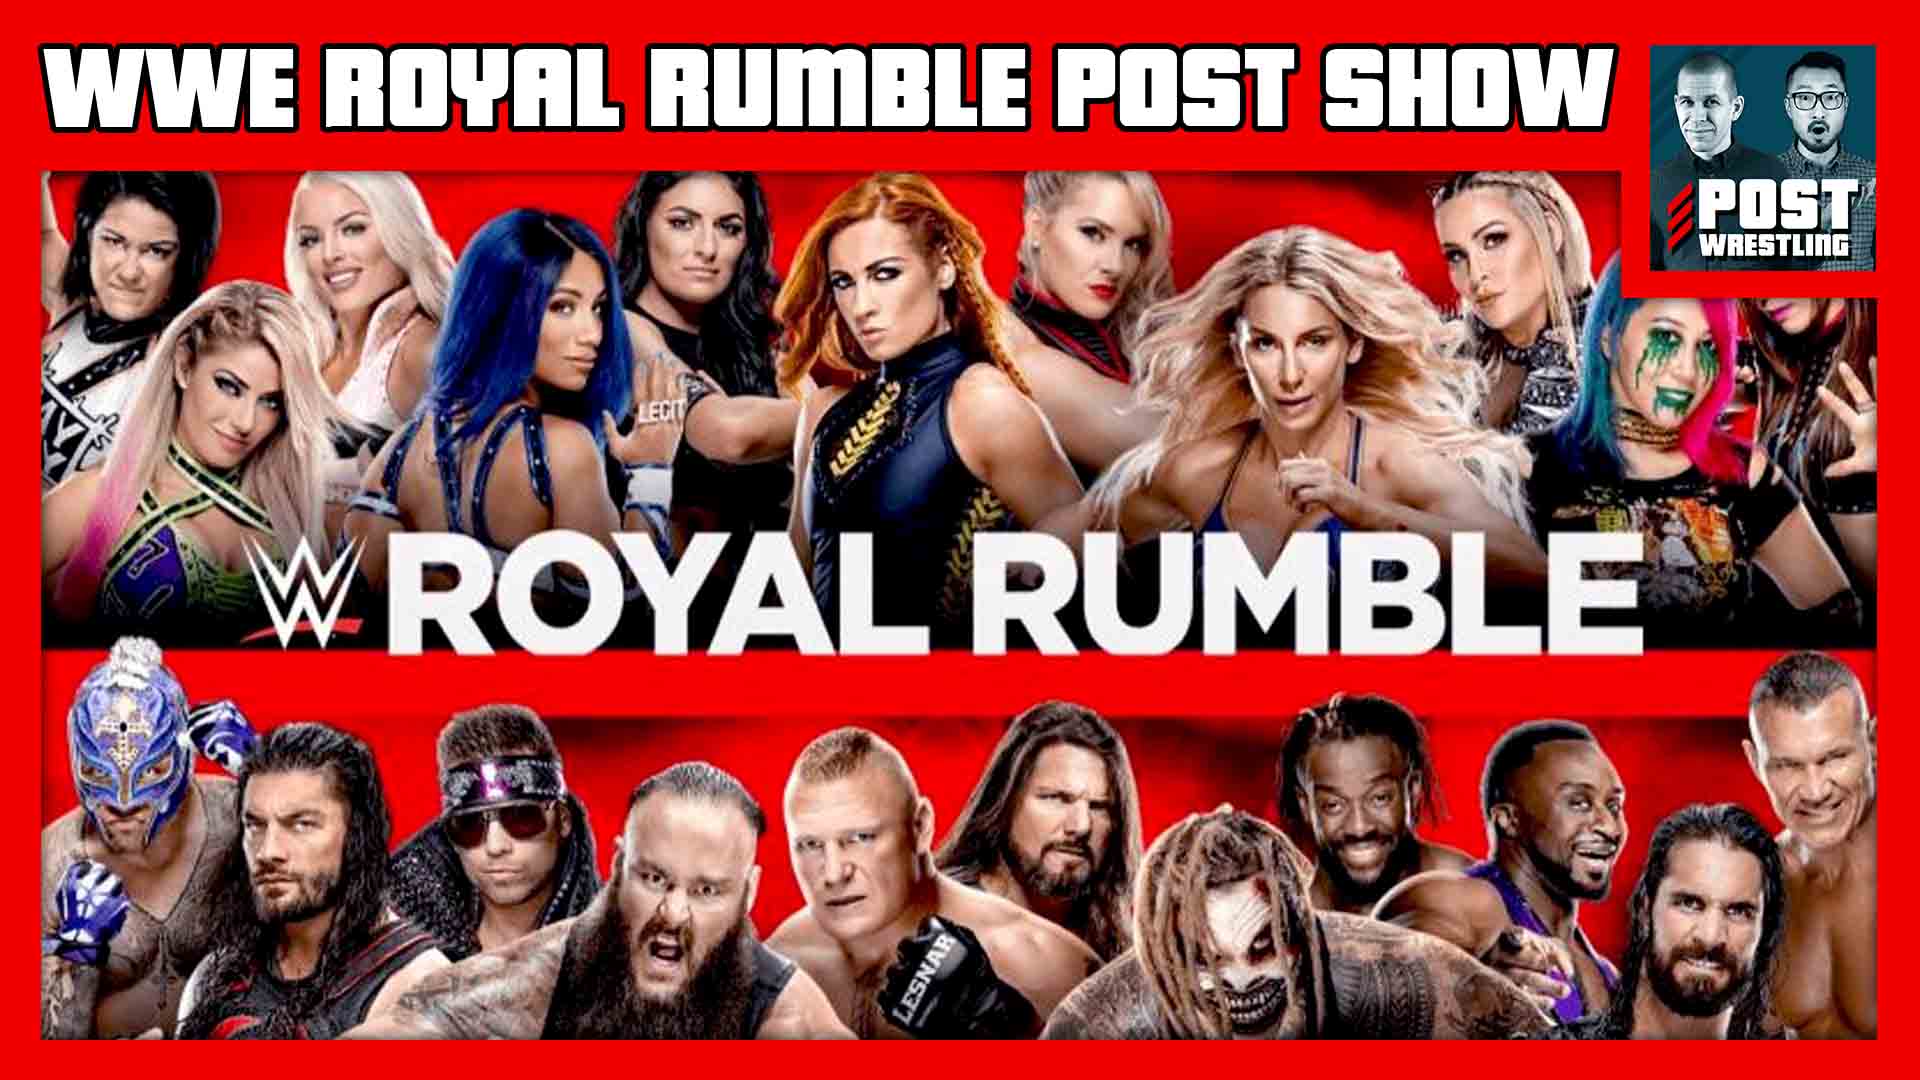 Live link for tonight's WWE Royal Rumble 2019 POST Show